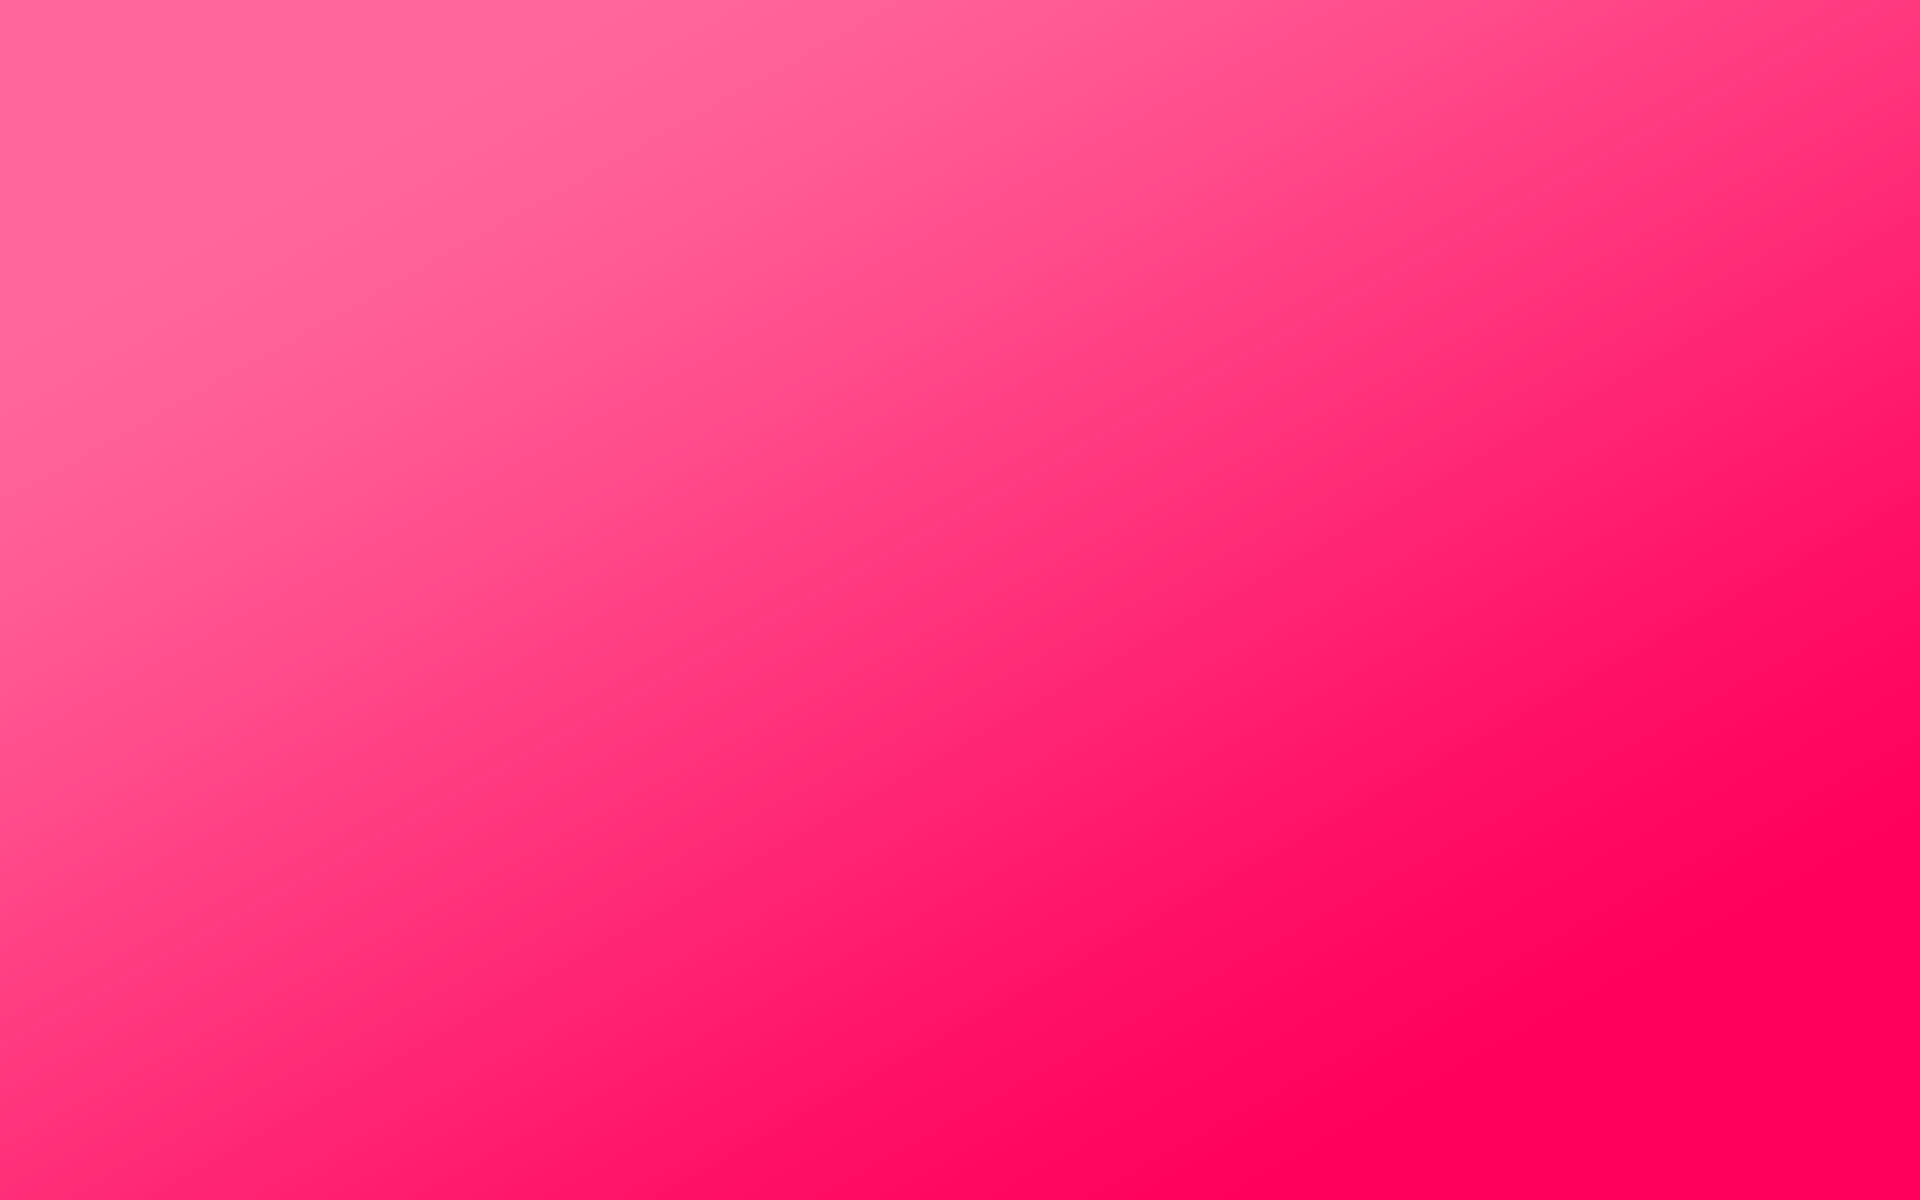 Plain Pink Ombre Background